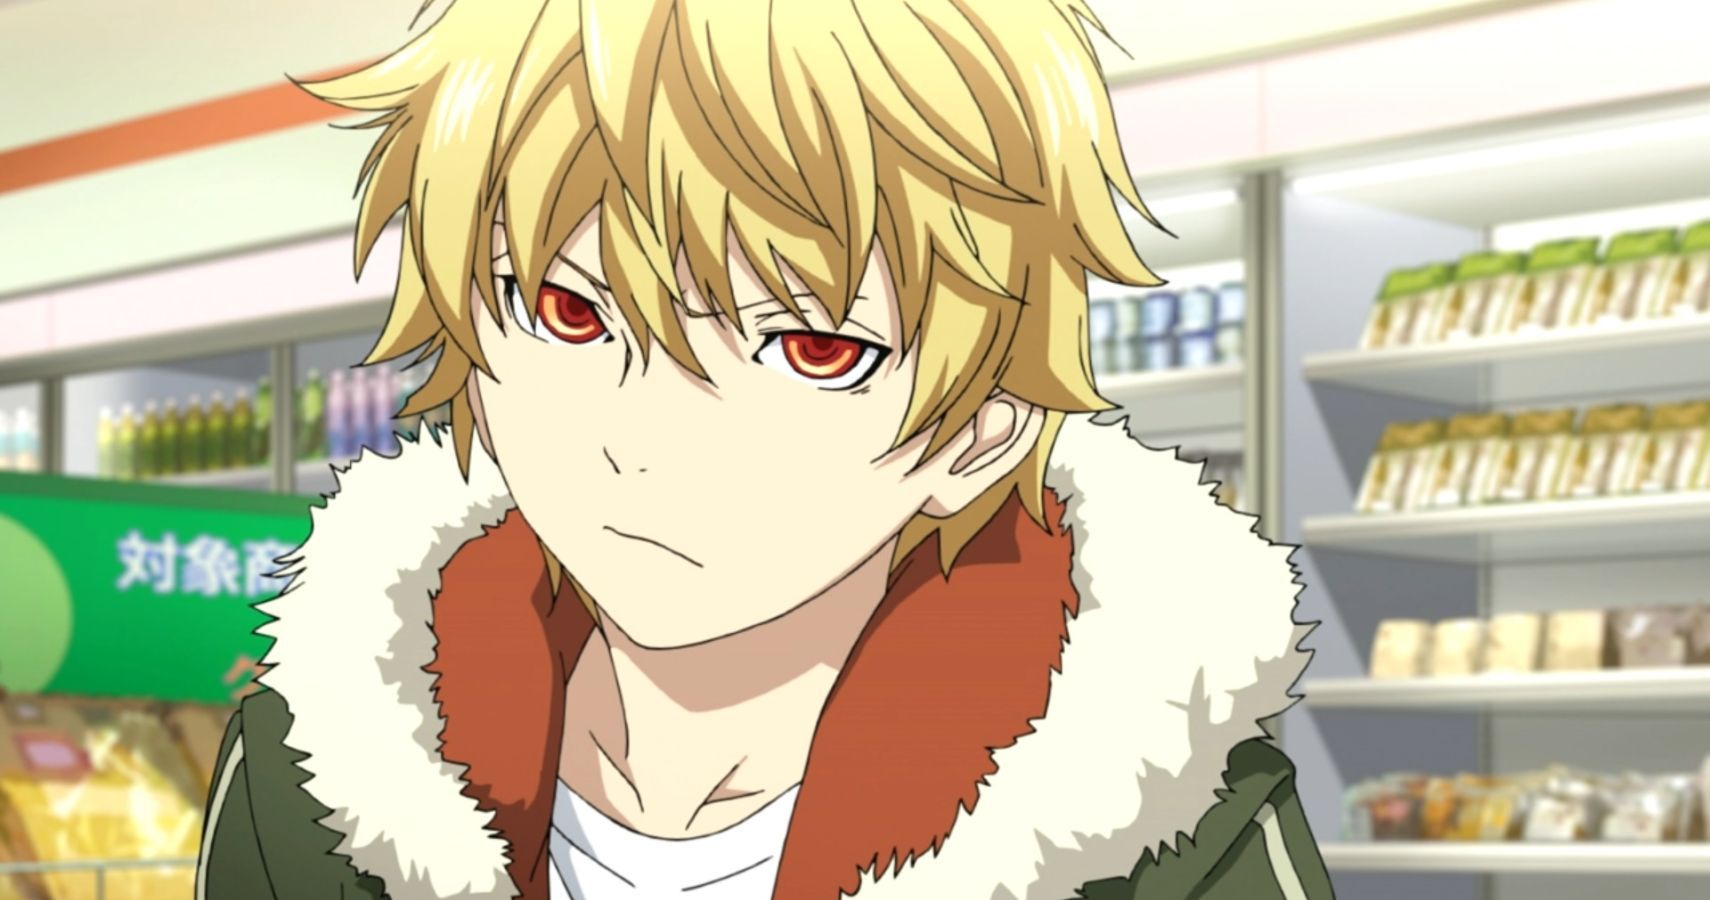 10. "Yukine" from Noragami - wide 7